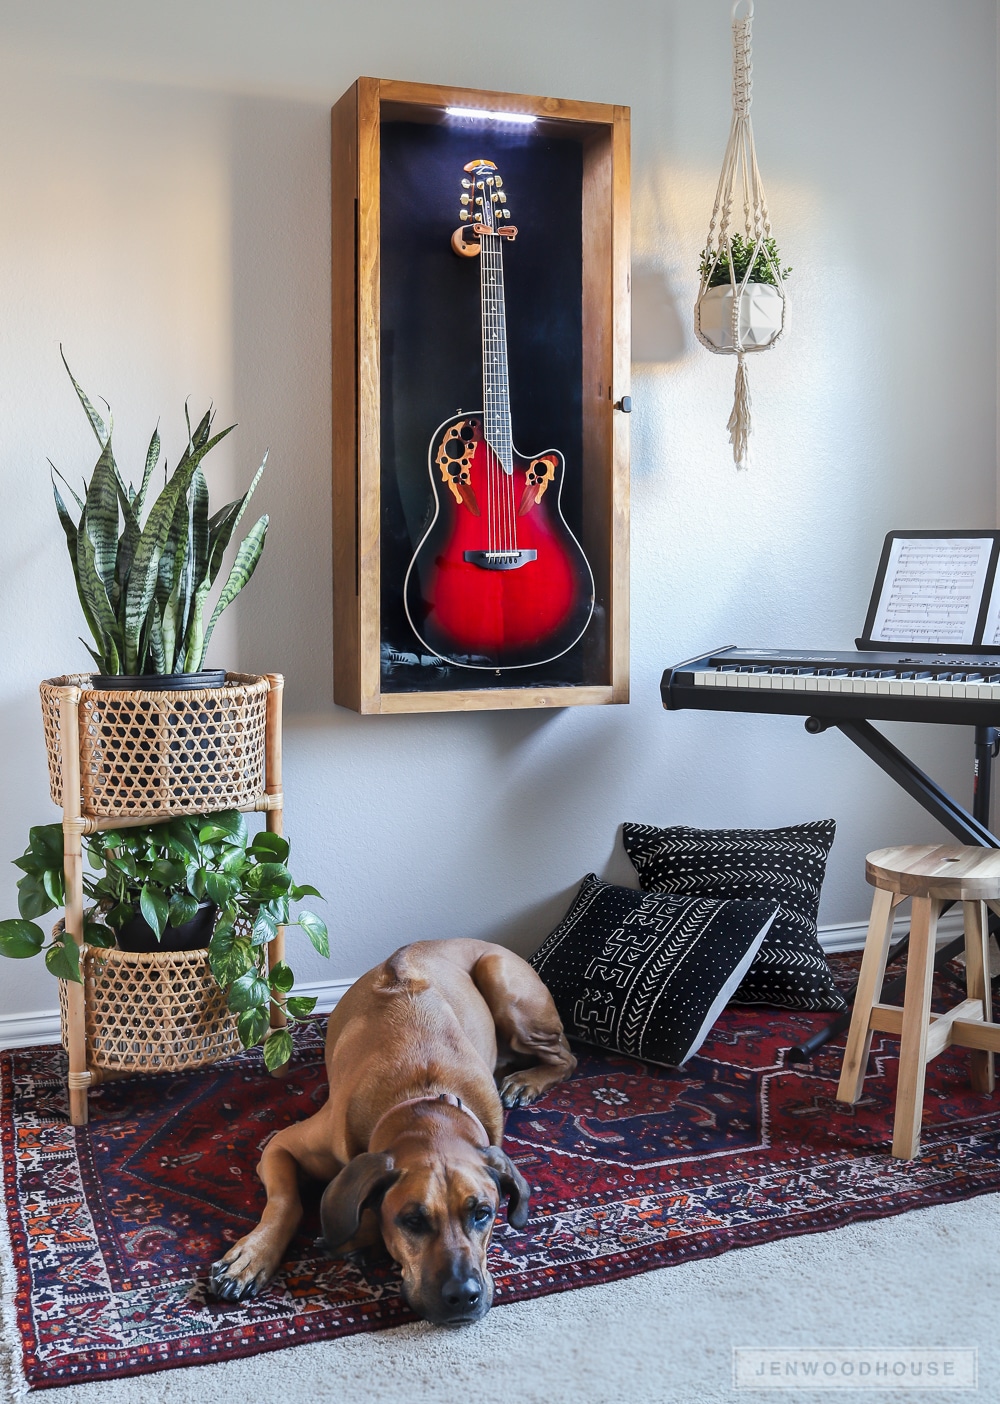 Display your treasured guitar in style! How to build a DIY Guitar Display Case